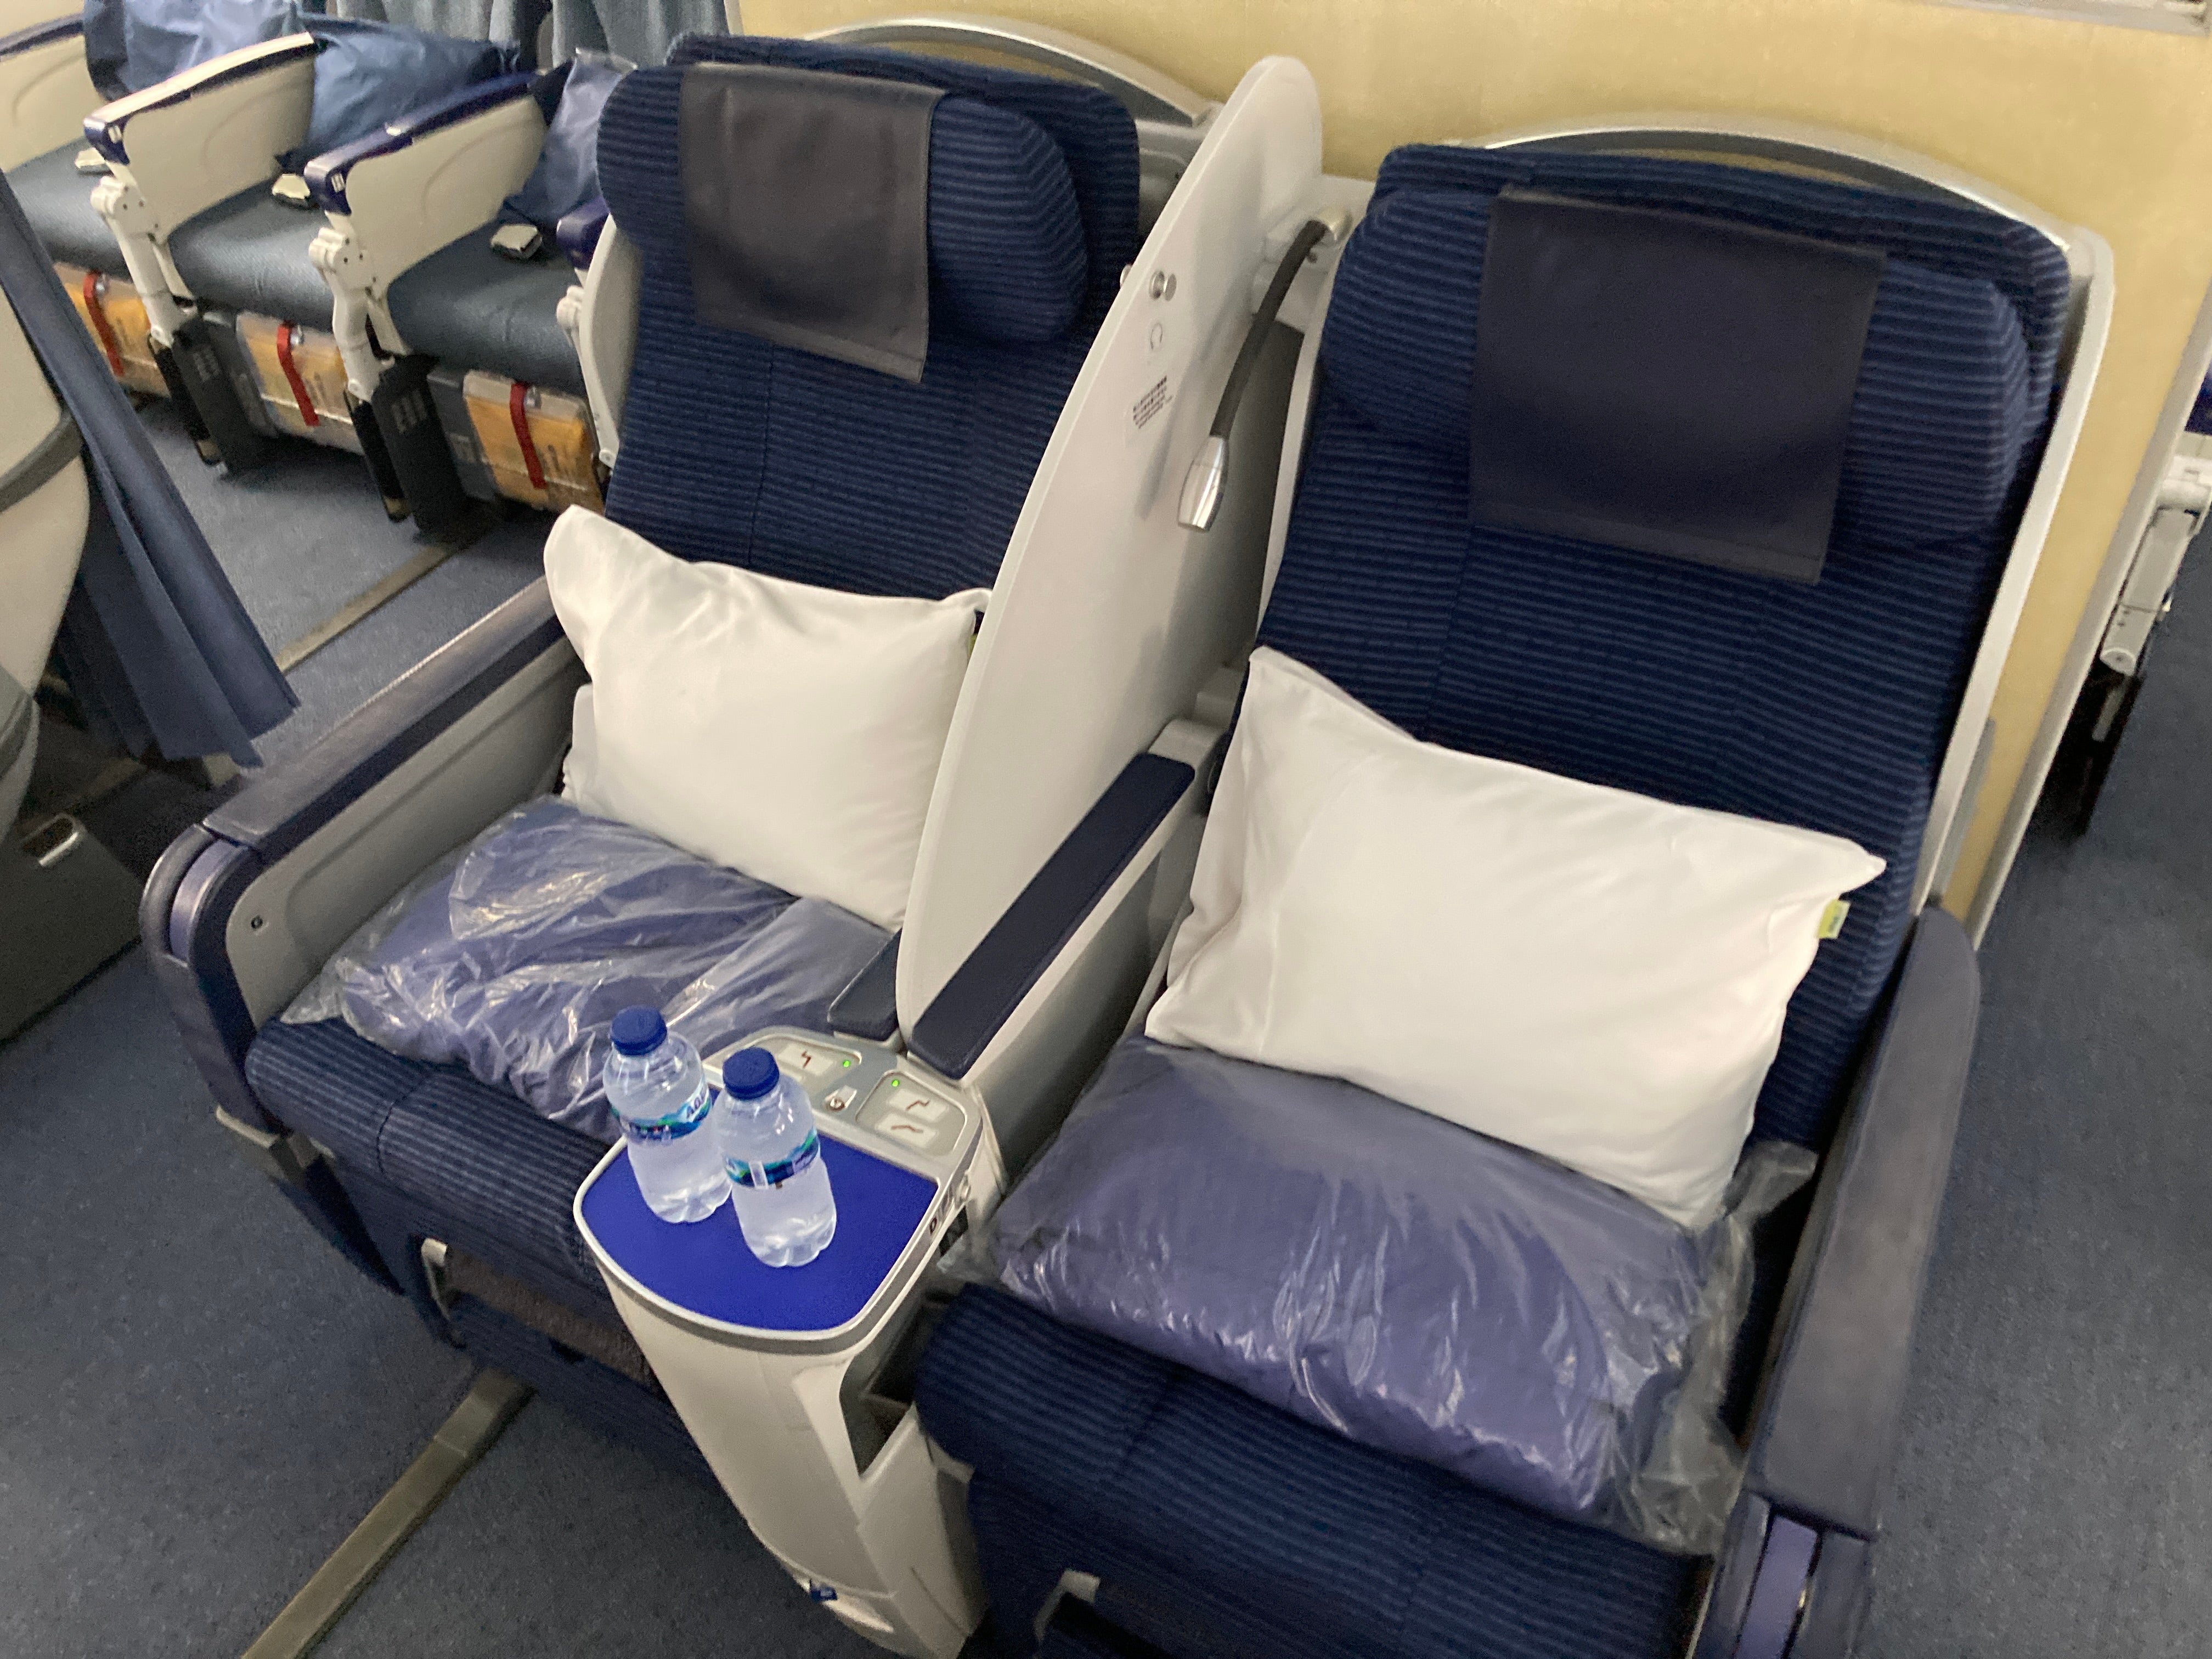 ANA Boeing 787-8 Business Class Review [CGK to HND]